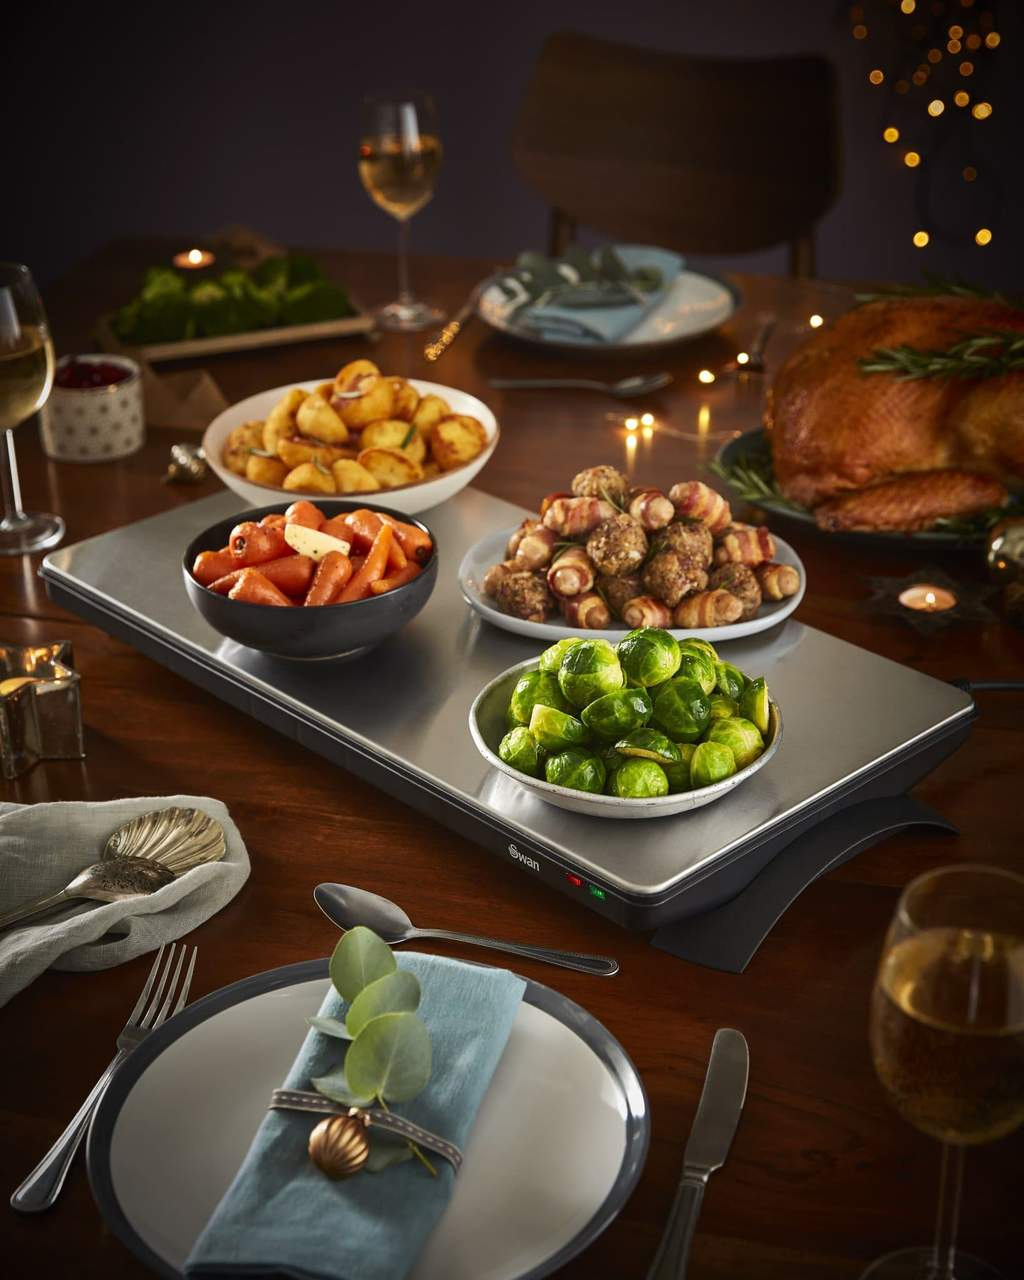 Rent the Swan buffet server and warming plate from BIYU for the perfect party. Serve warm food and impress your guests with this professional catering equipment.